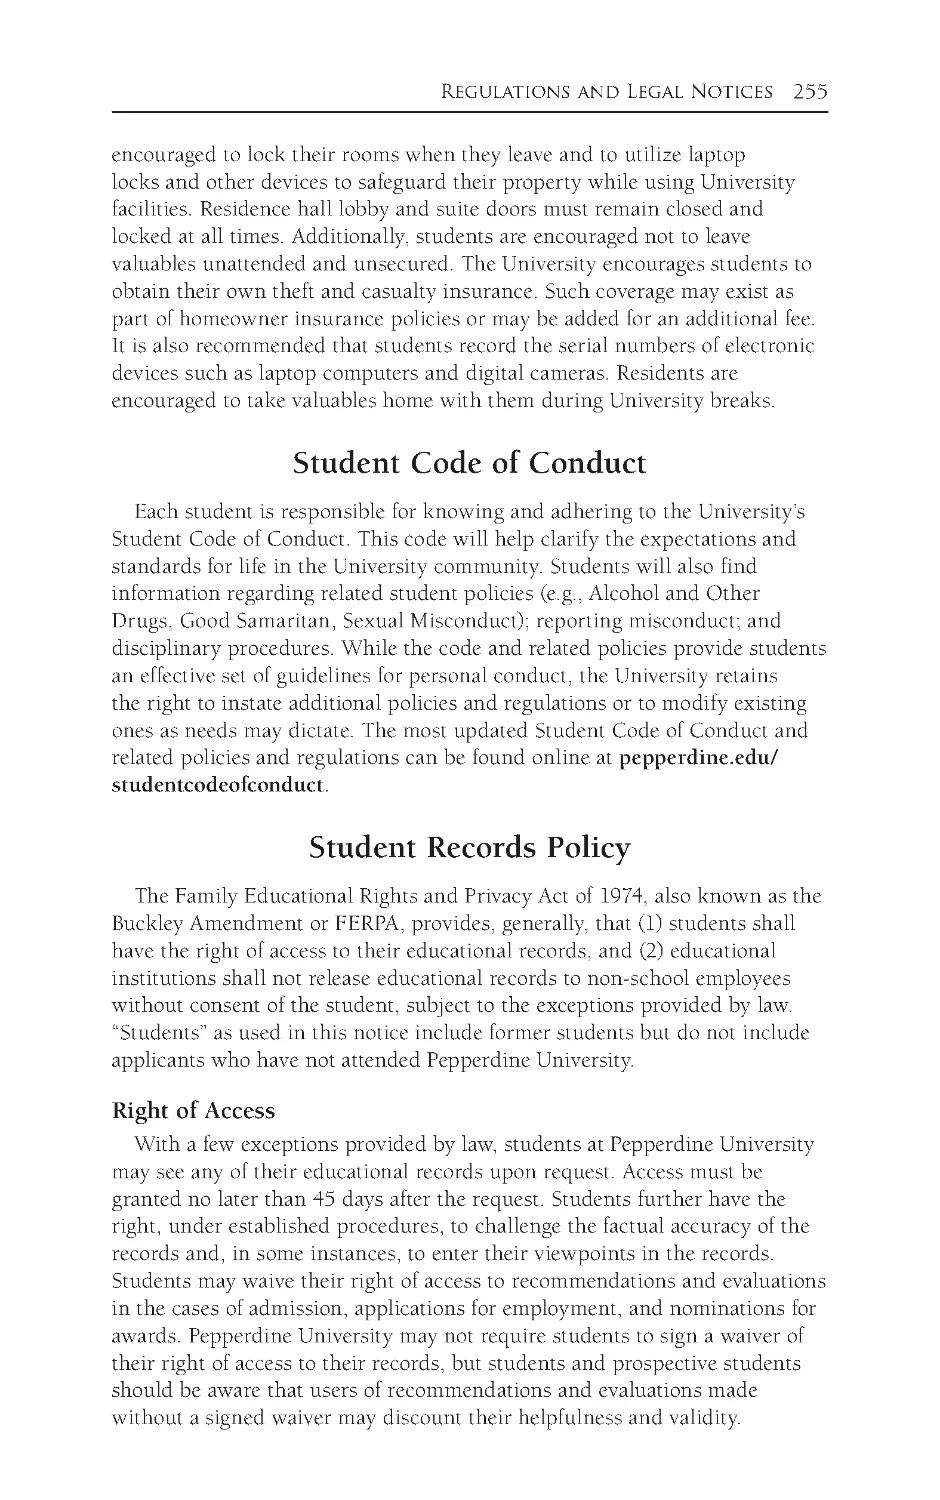 Student Code of Conduct
Student Records Policy